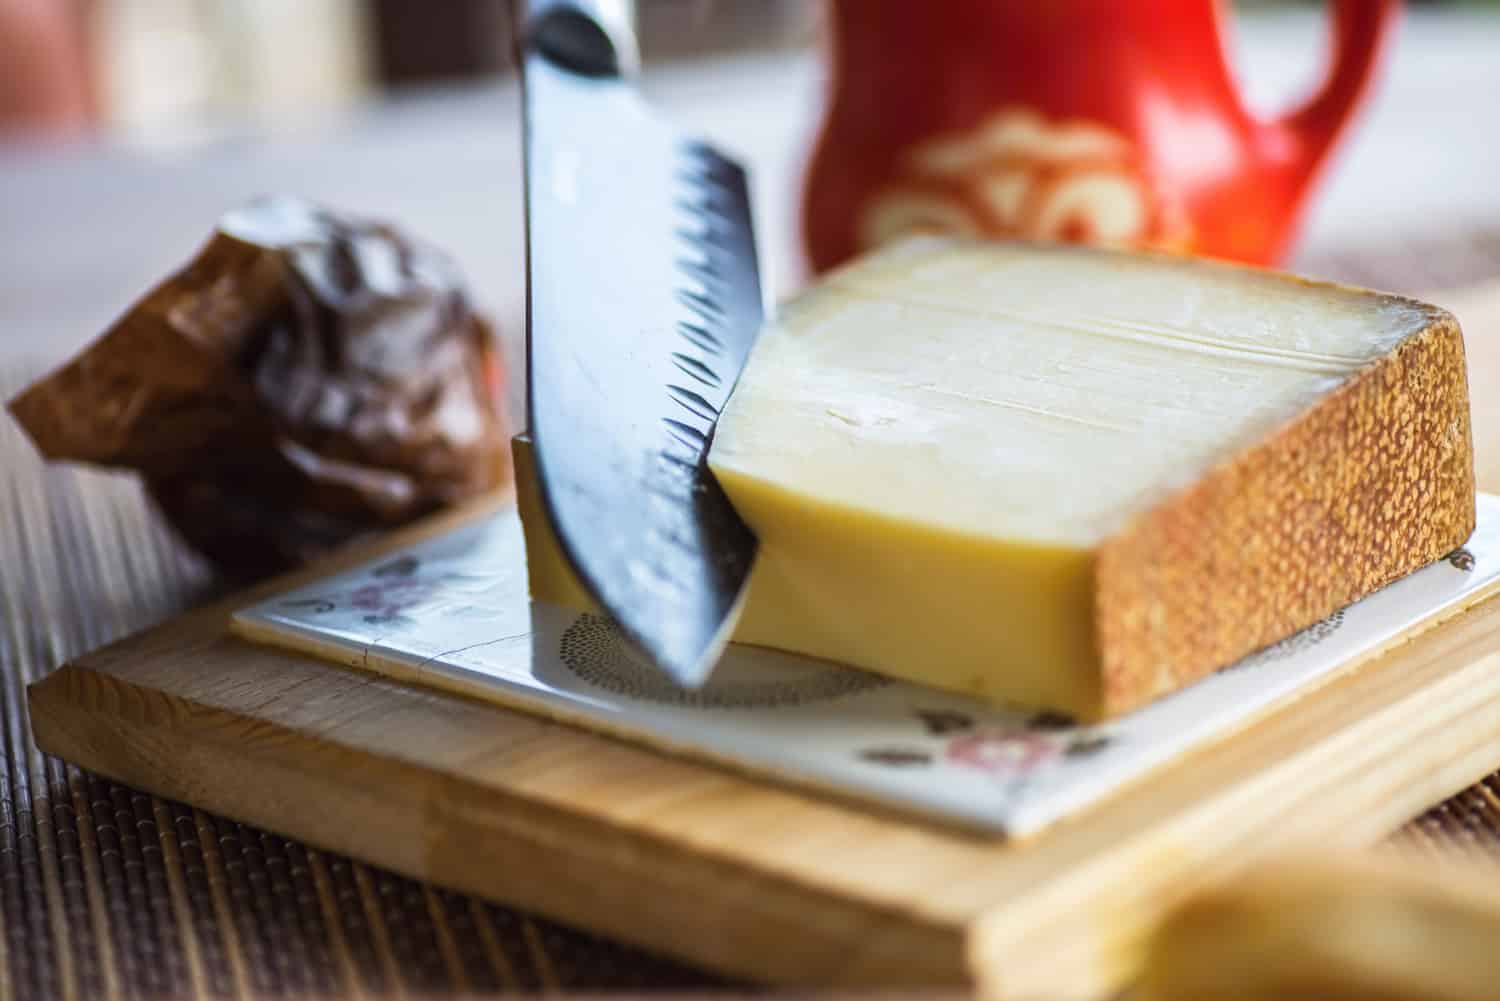 Big knife slices traditional gruyere cheese on kitchen board, nice old red jug on background.